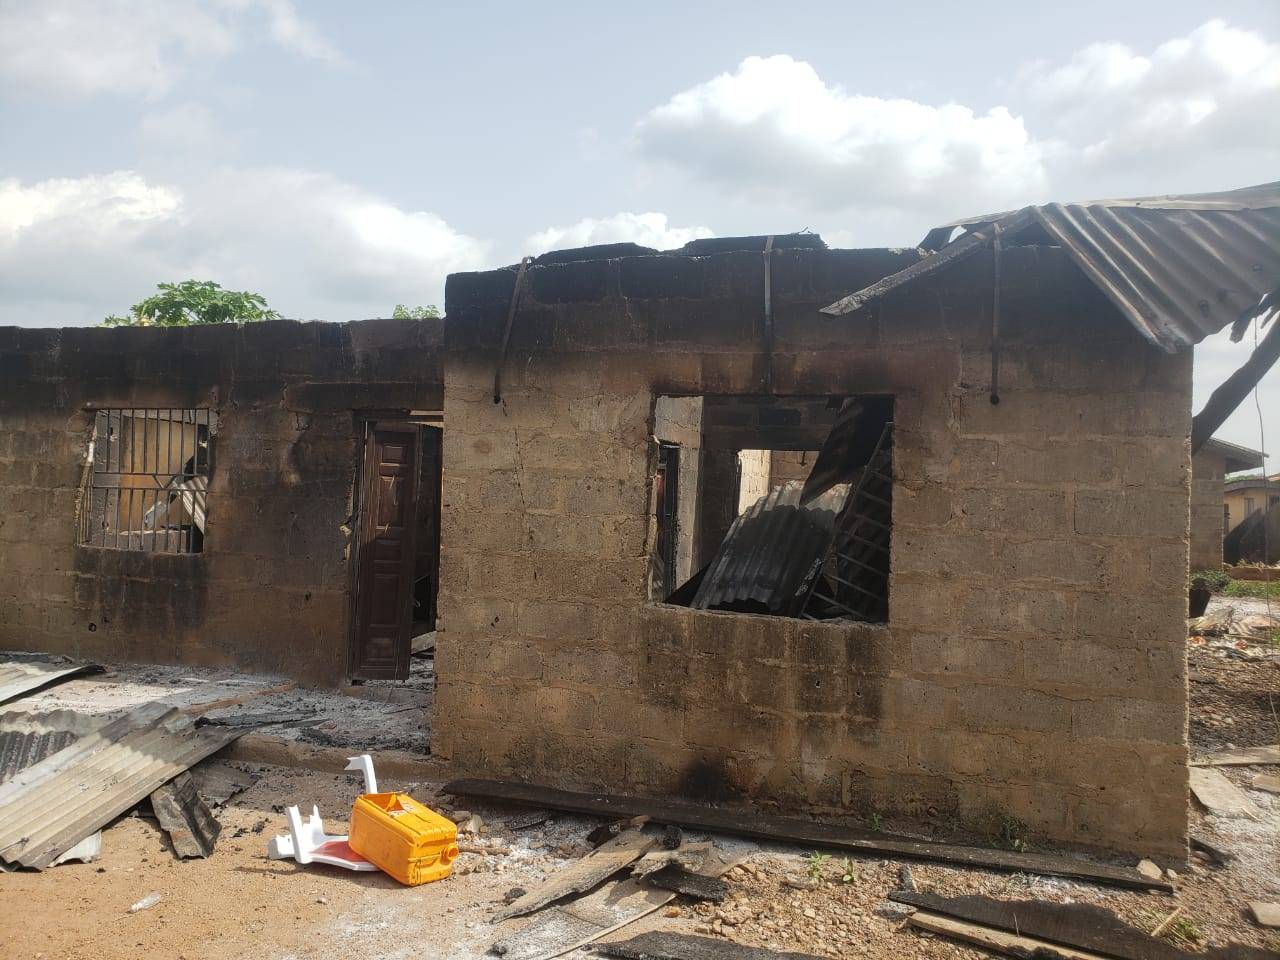 Ekiti Islamic cleric allegedly sets his wife?s house ablaze for refusing to participate in late night prayer